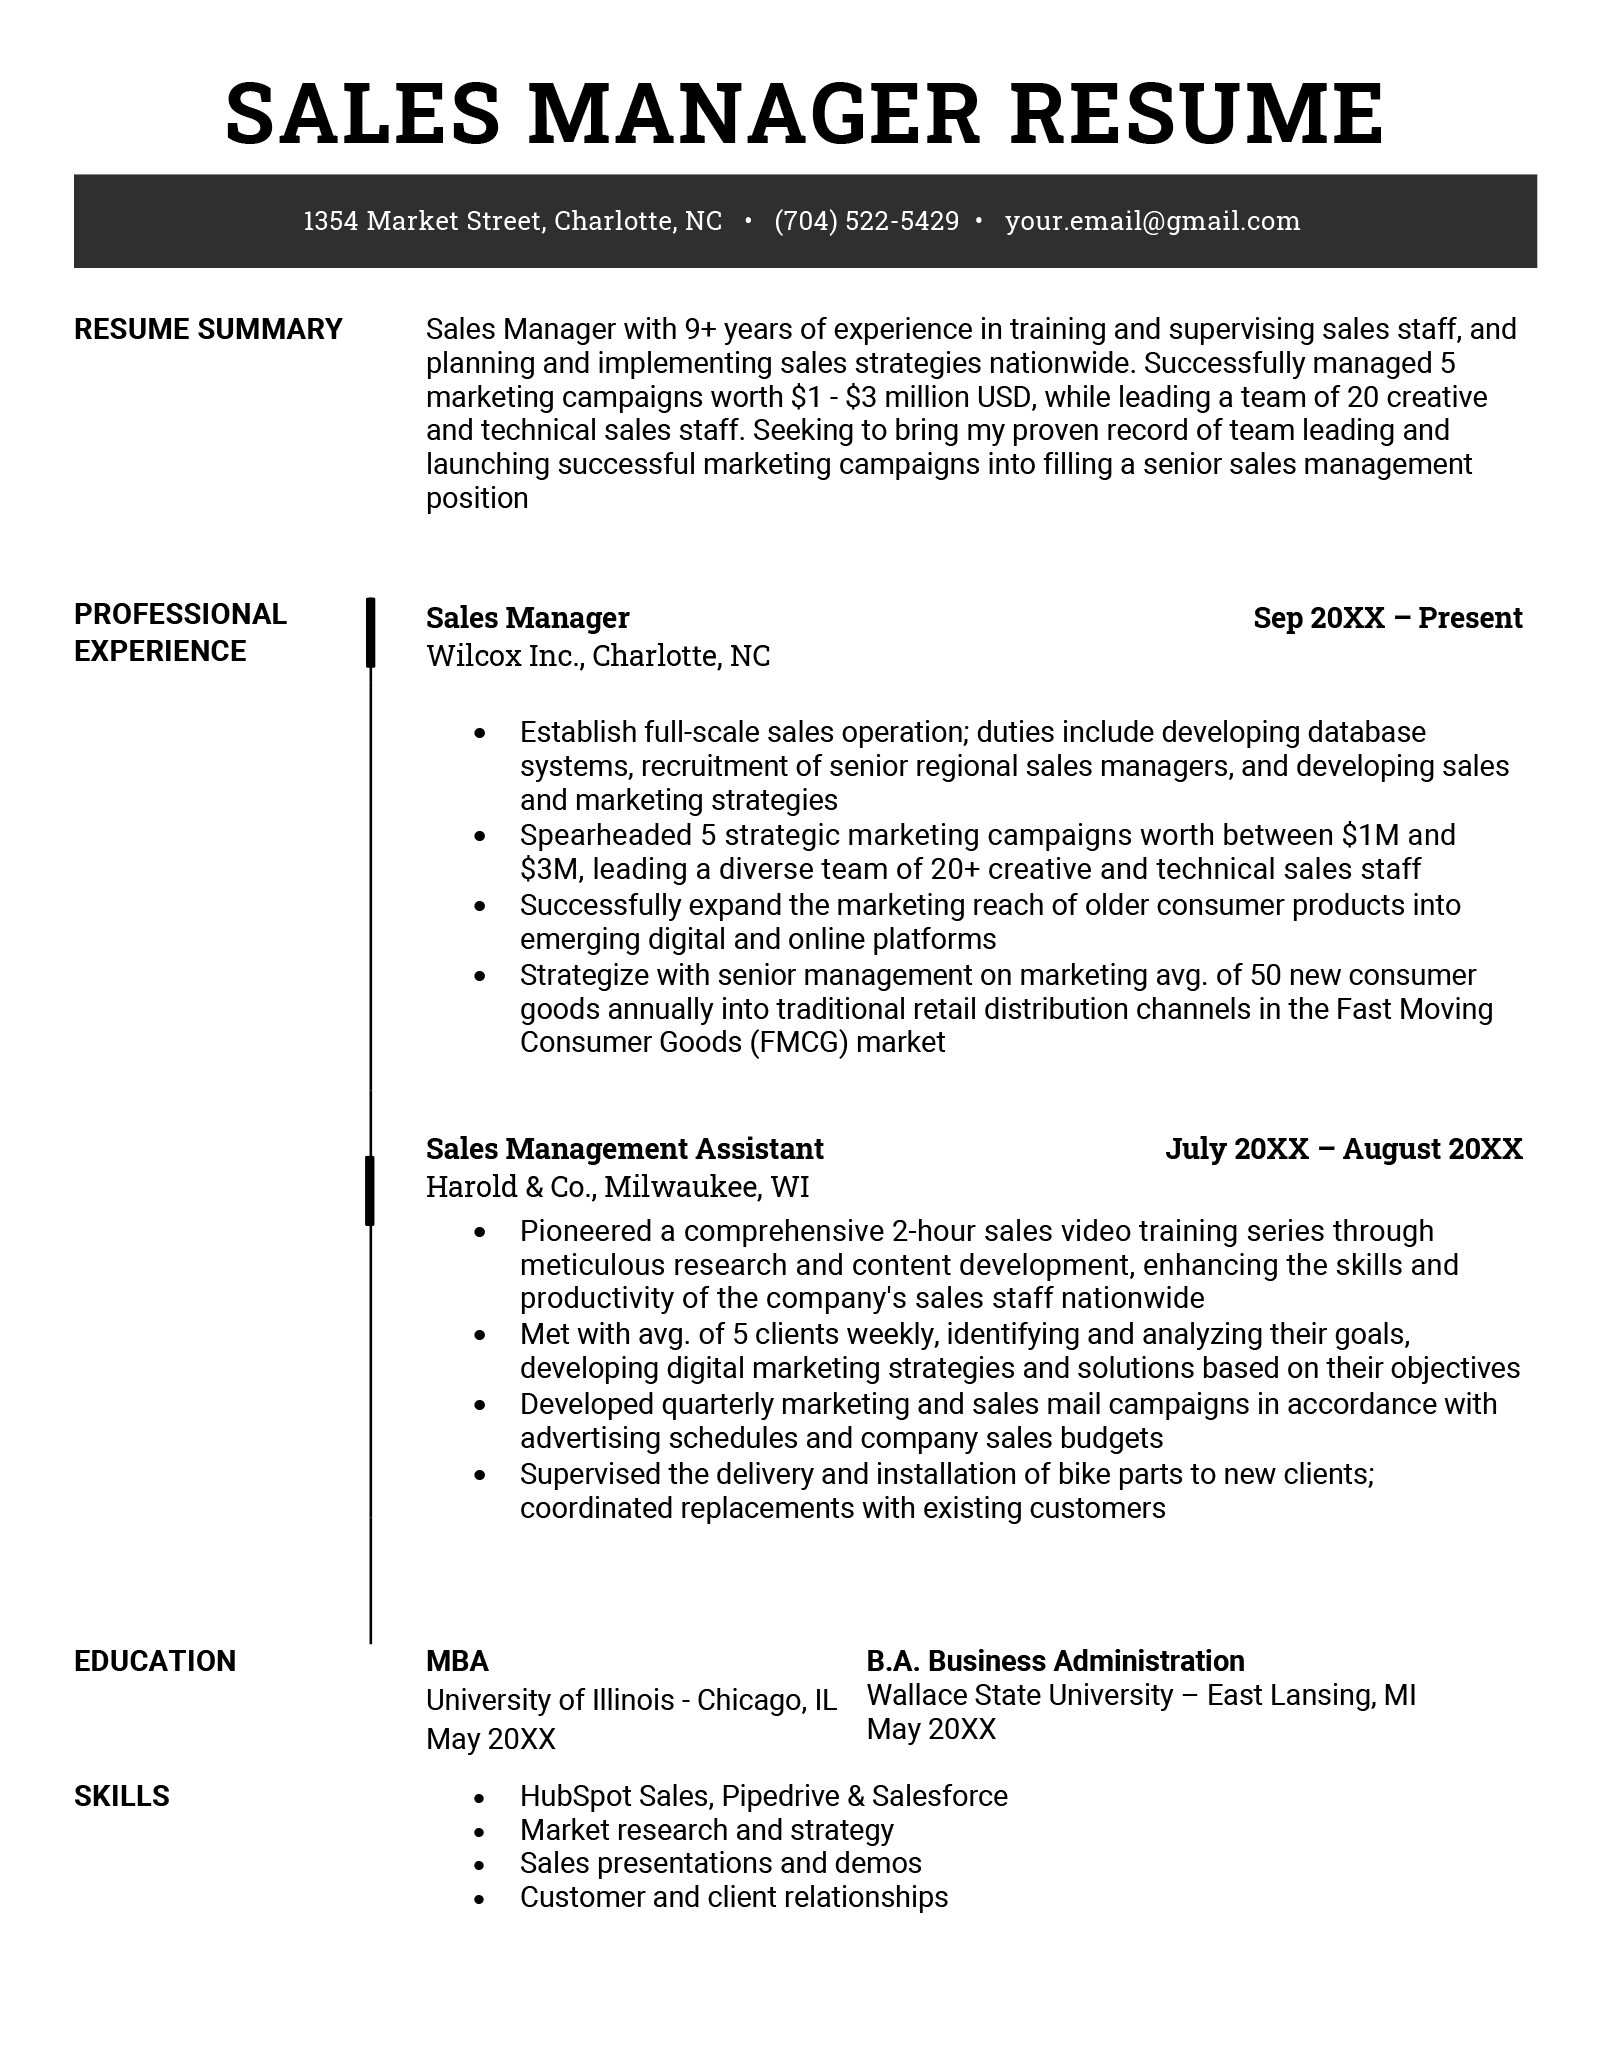 An example of a sales manager resume